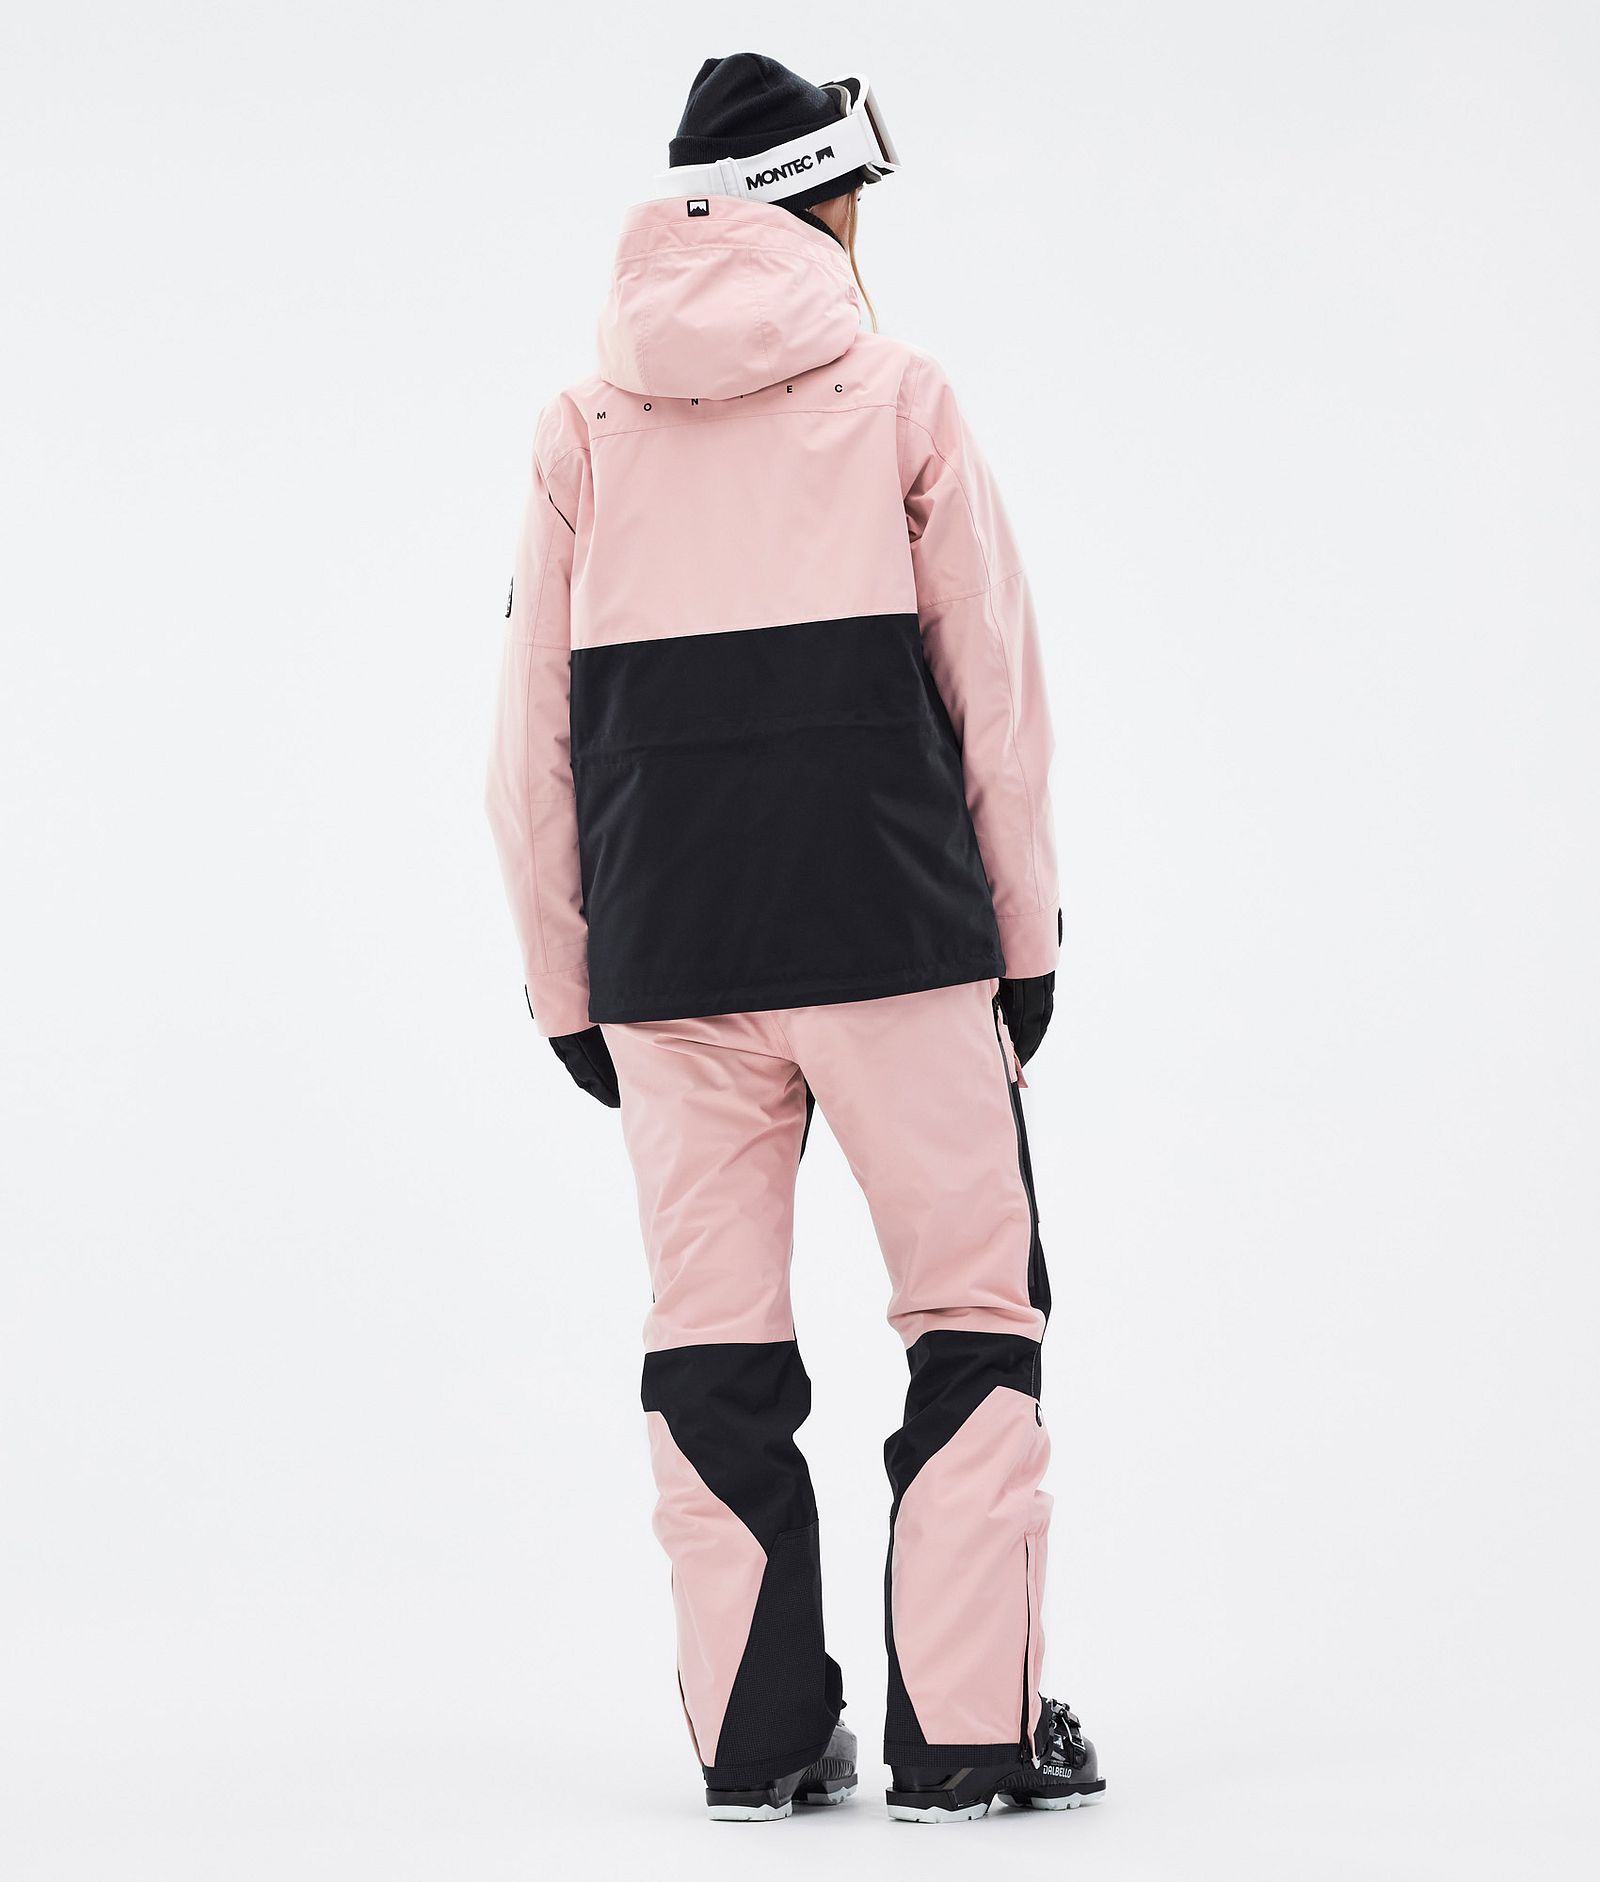 Doom W Outfit Sci Donna Soft Pink/Black